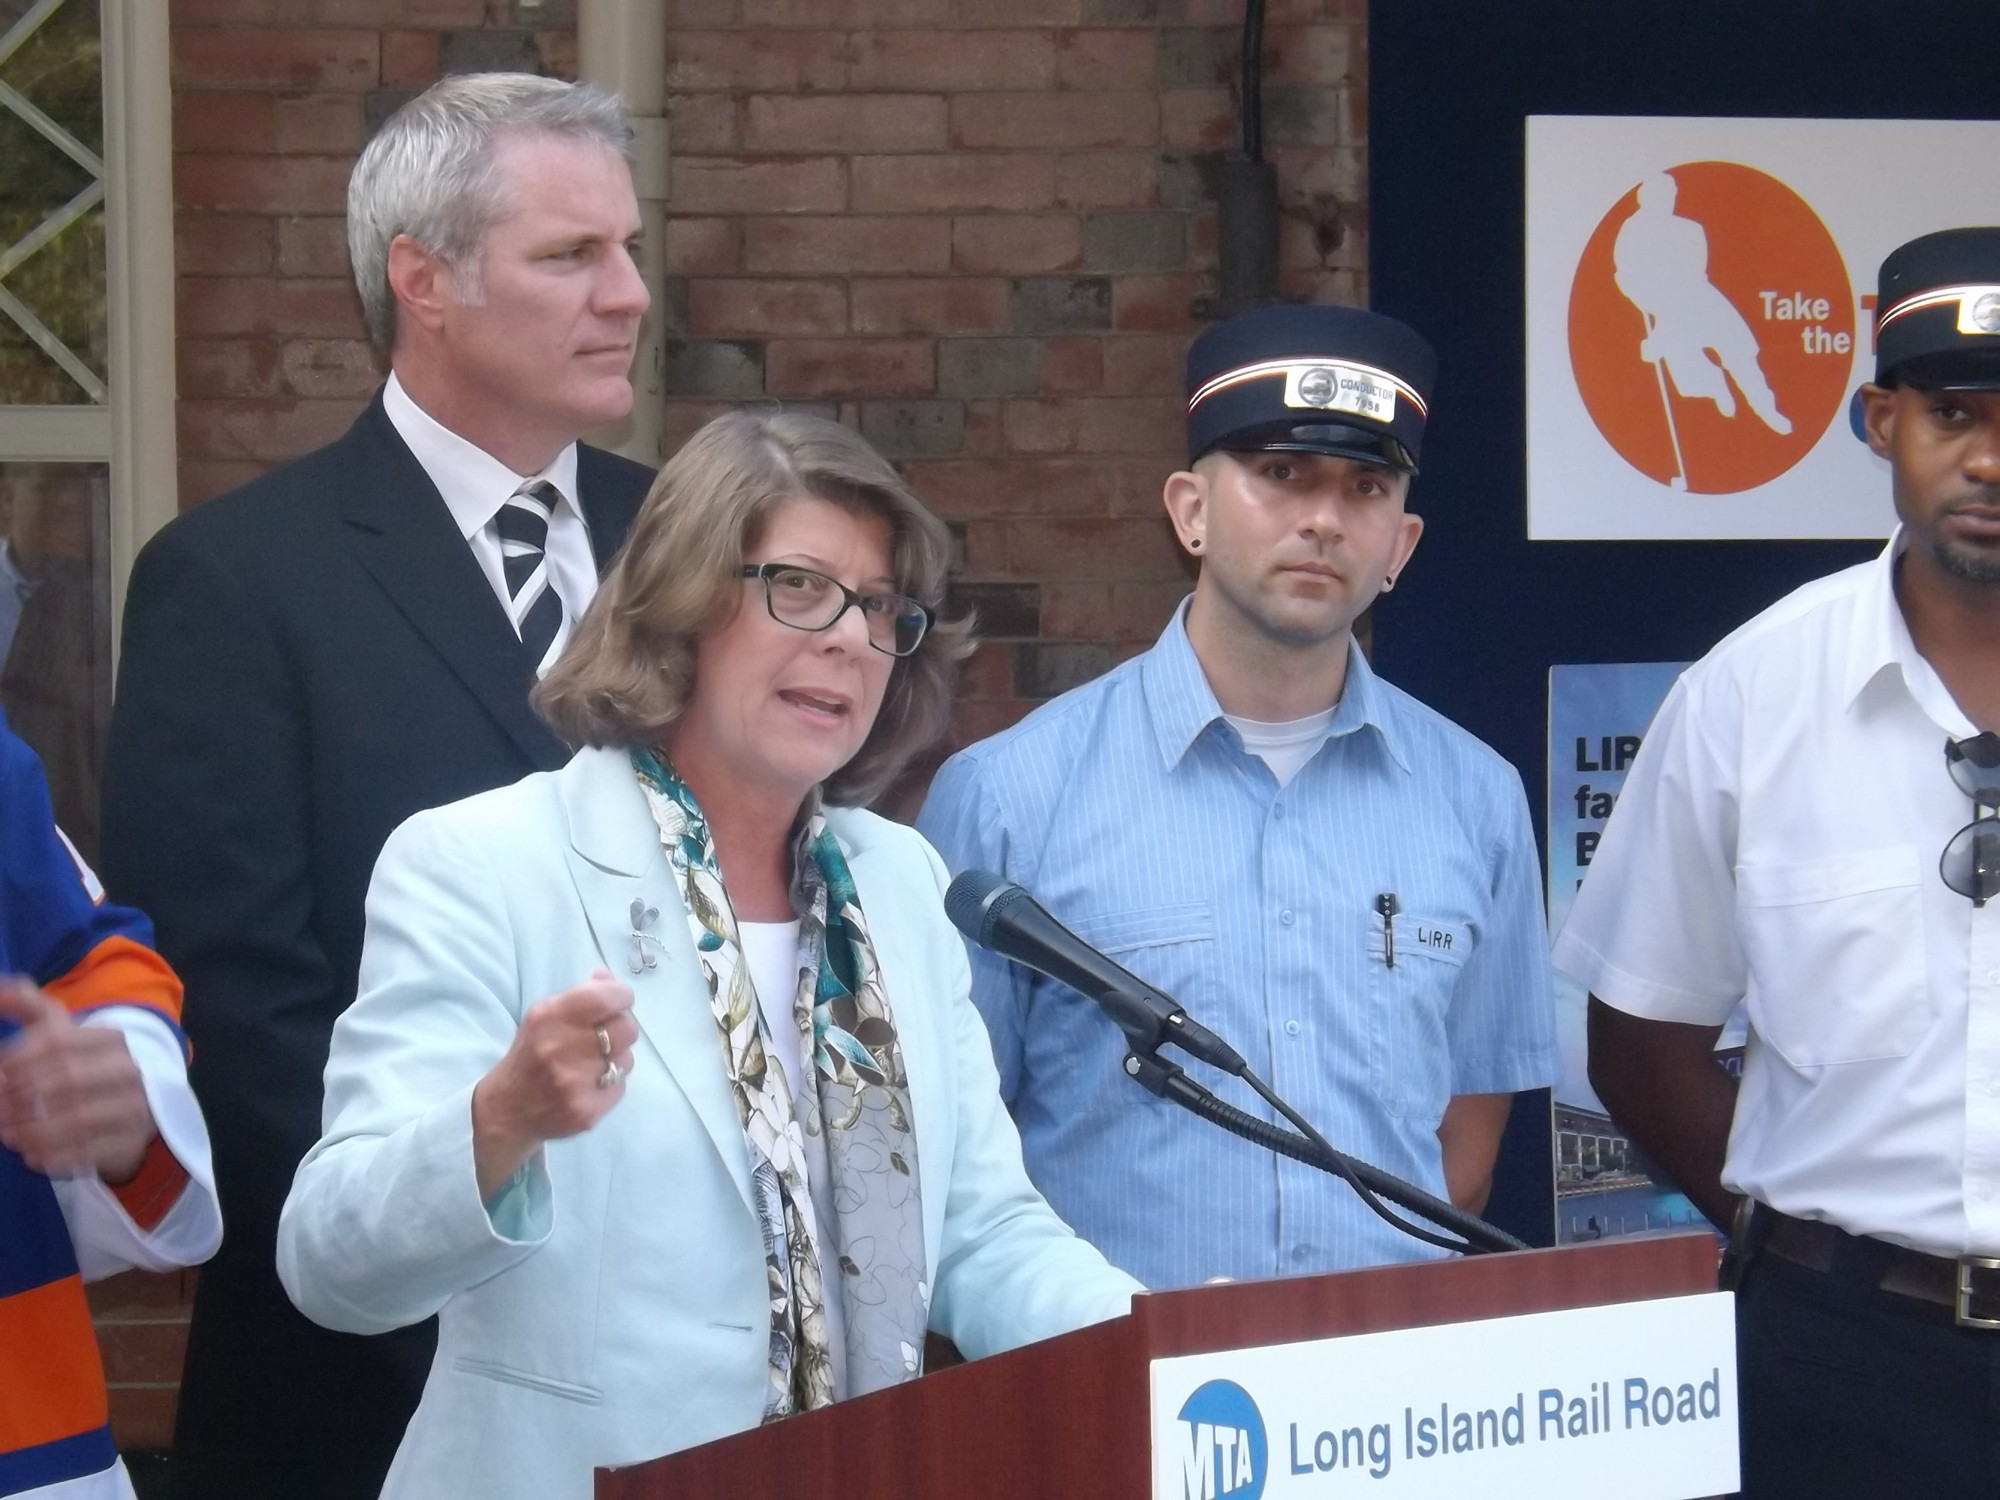 Helena Williams, president of the Long Island Rail Road, welcomed the Islanders to the LIRR station in Garden City before the team took the train into Brooklyn.